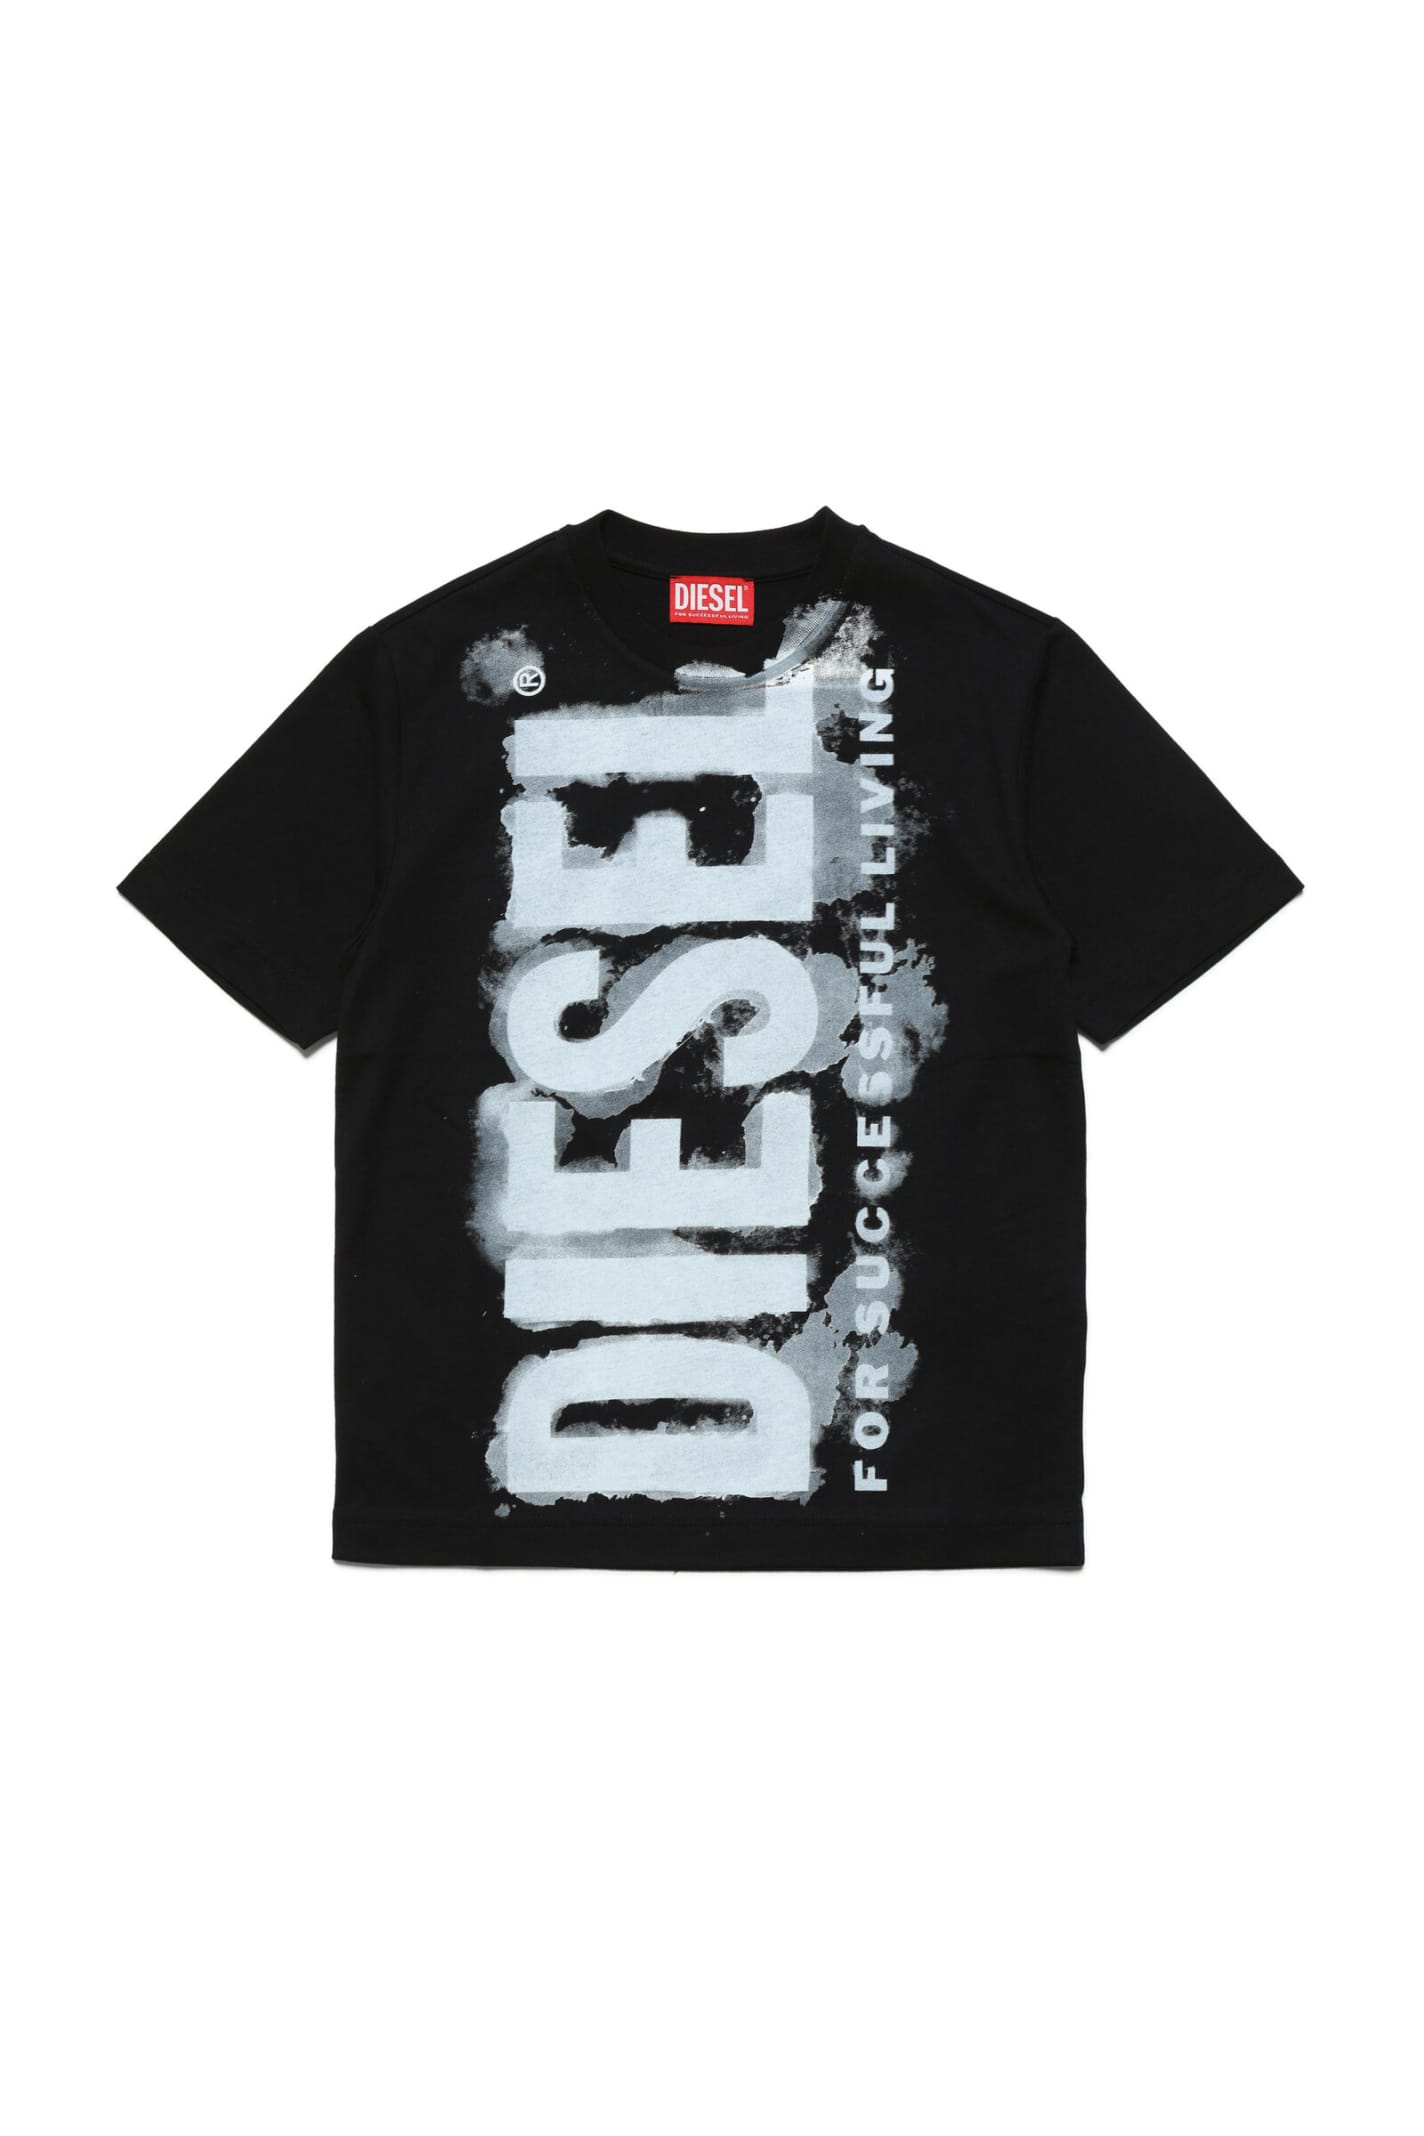 DIESEL TJUSTE16 OVER T-SHIRT DIESEL BLACK JERSEY T-SHIRT WITH WATERCOLOR EFFECT LOGO